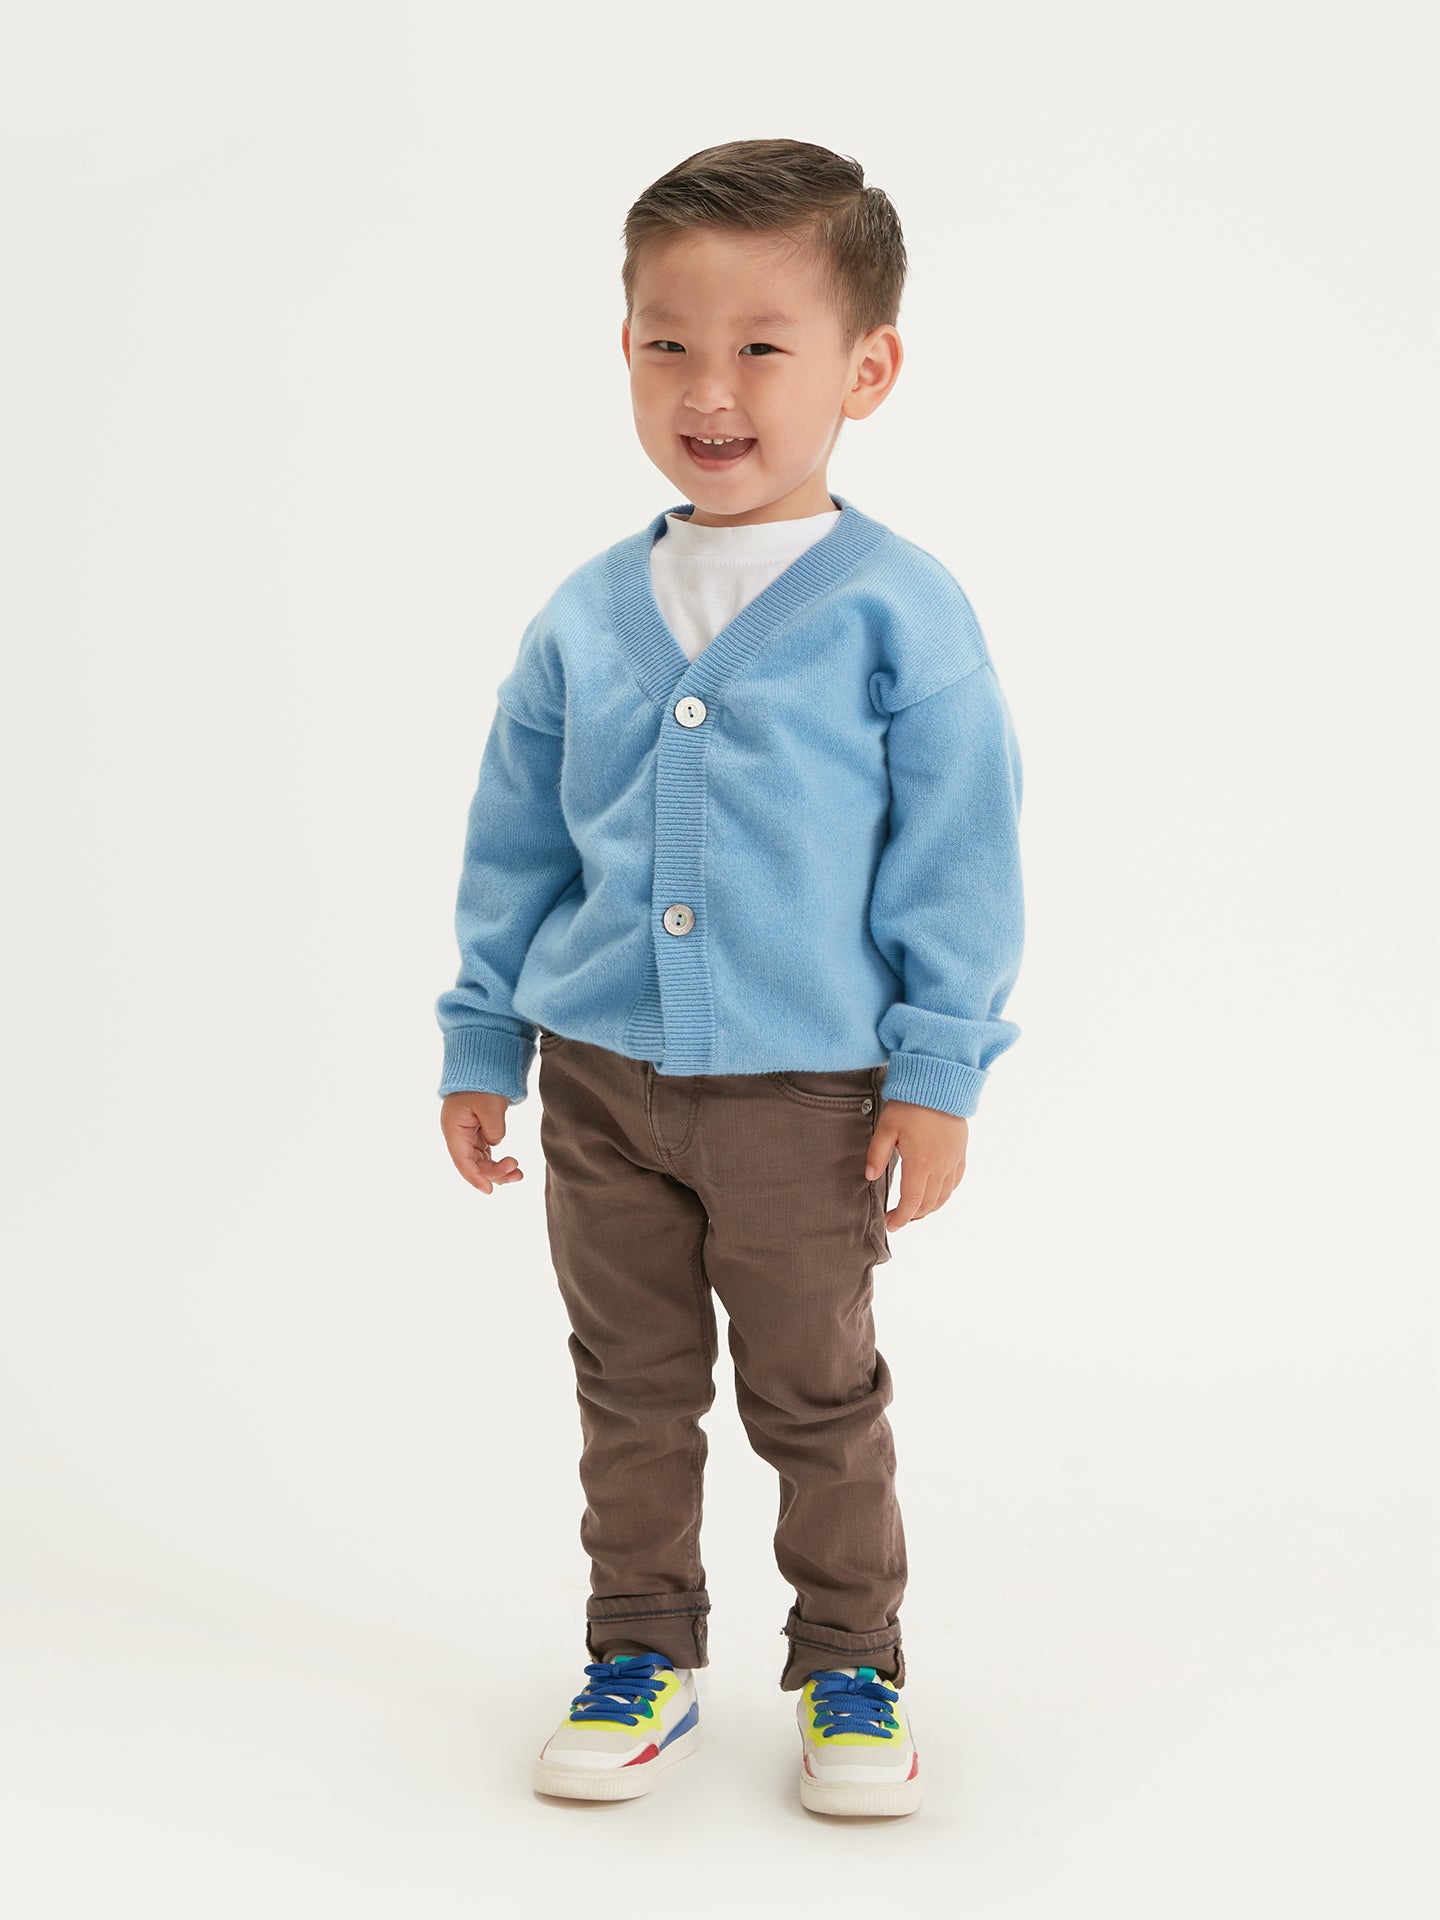 Cashmere Sweaters for Kids: Embrace the Comfort | GOBI Cashmere